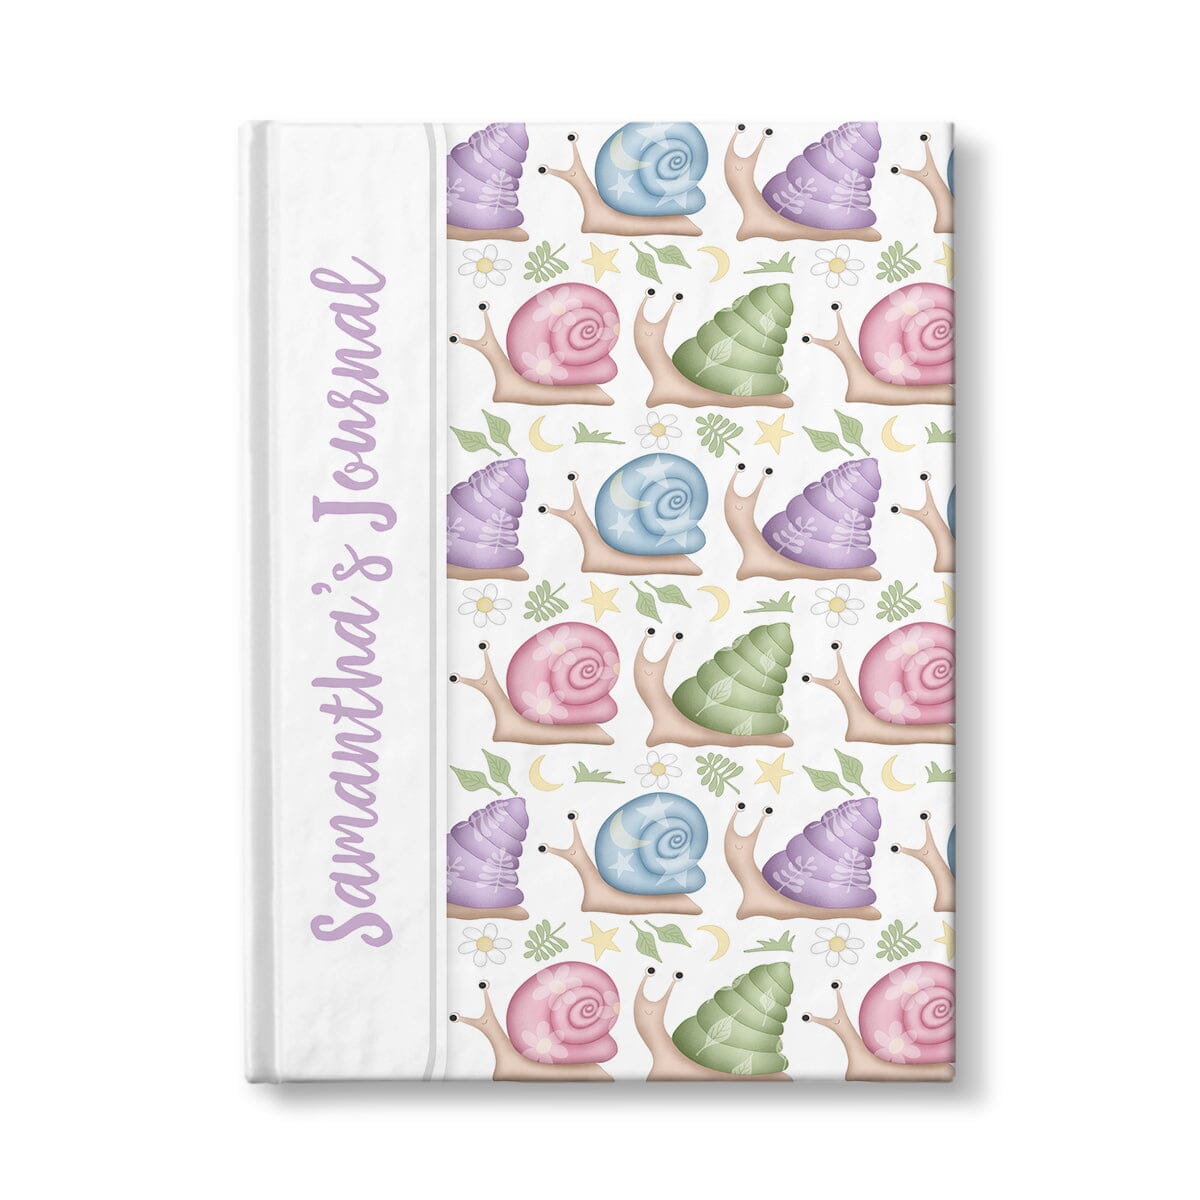 Personalized Cute Snails Journal with purple personalization at Artistically Invited.